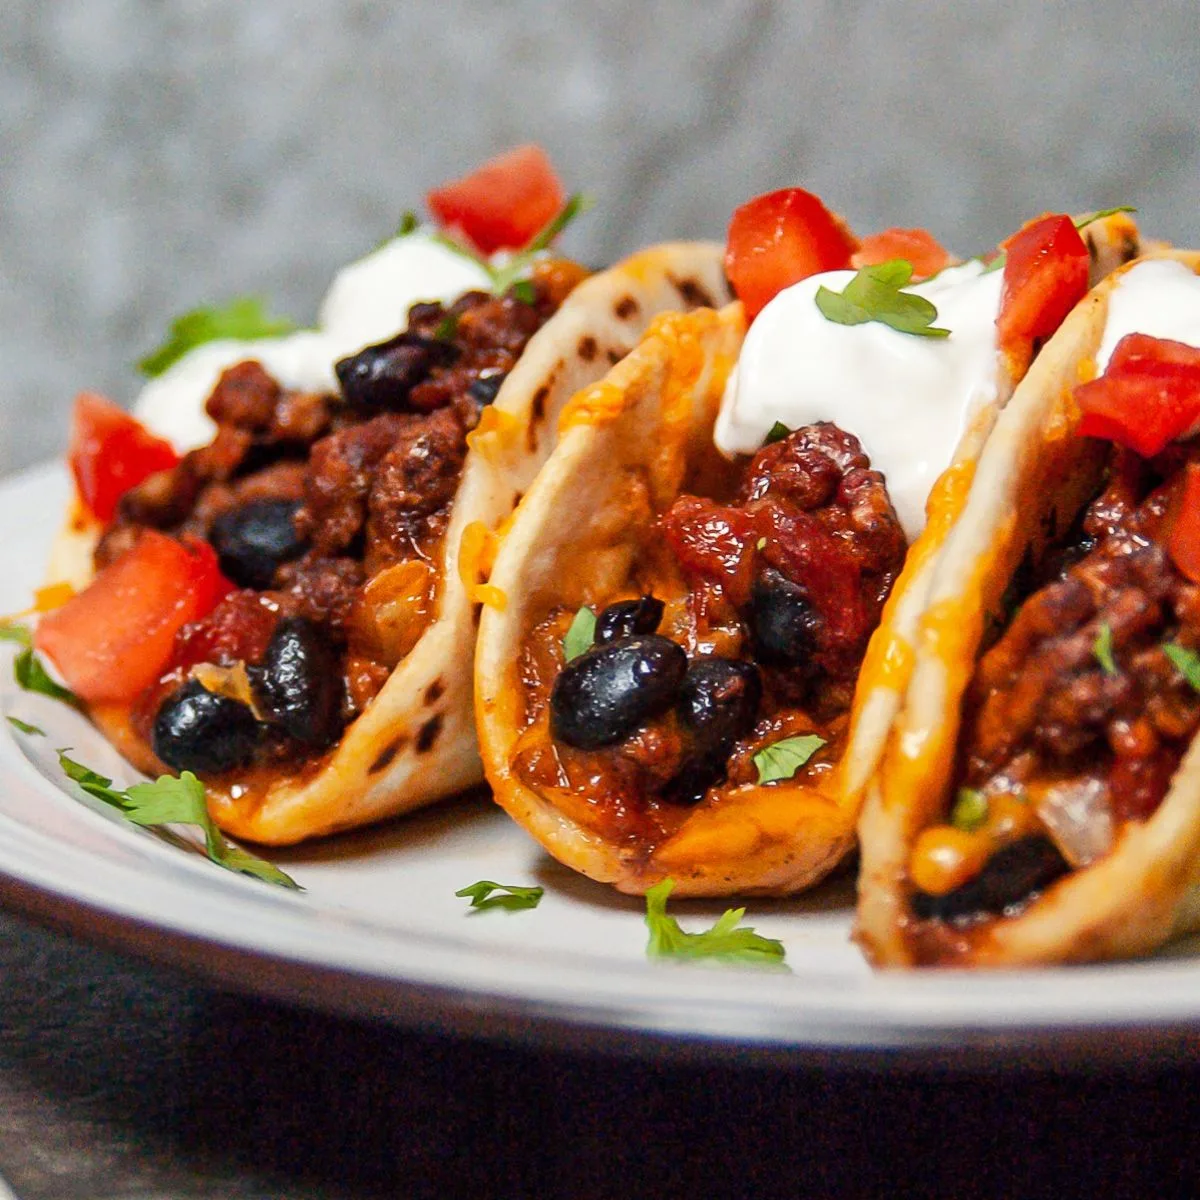 Baked turkey tacos with black beans